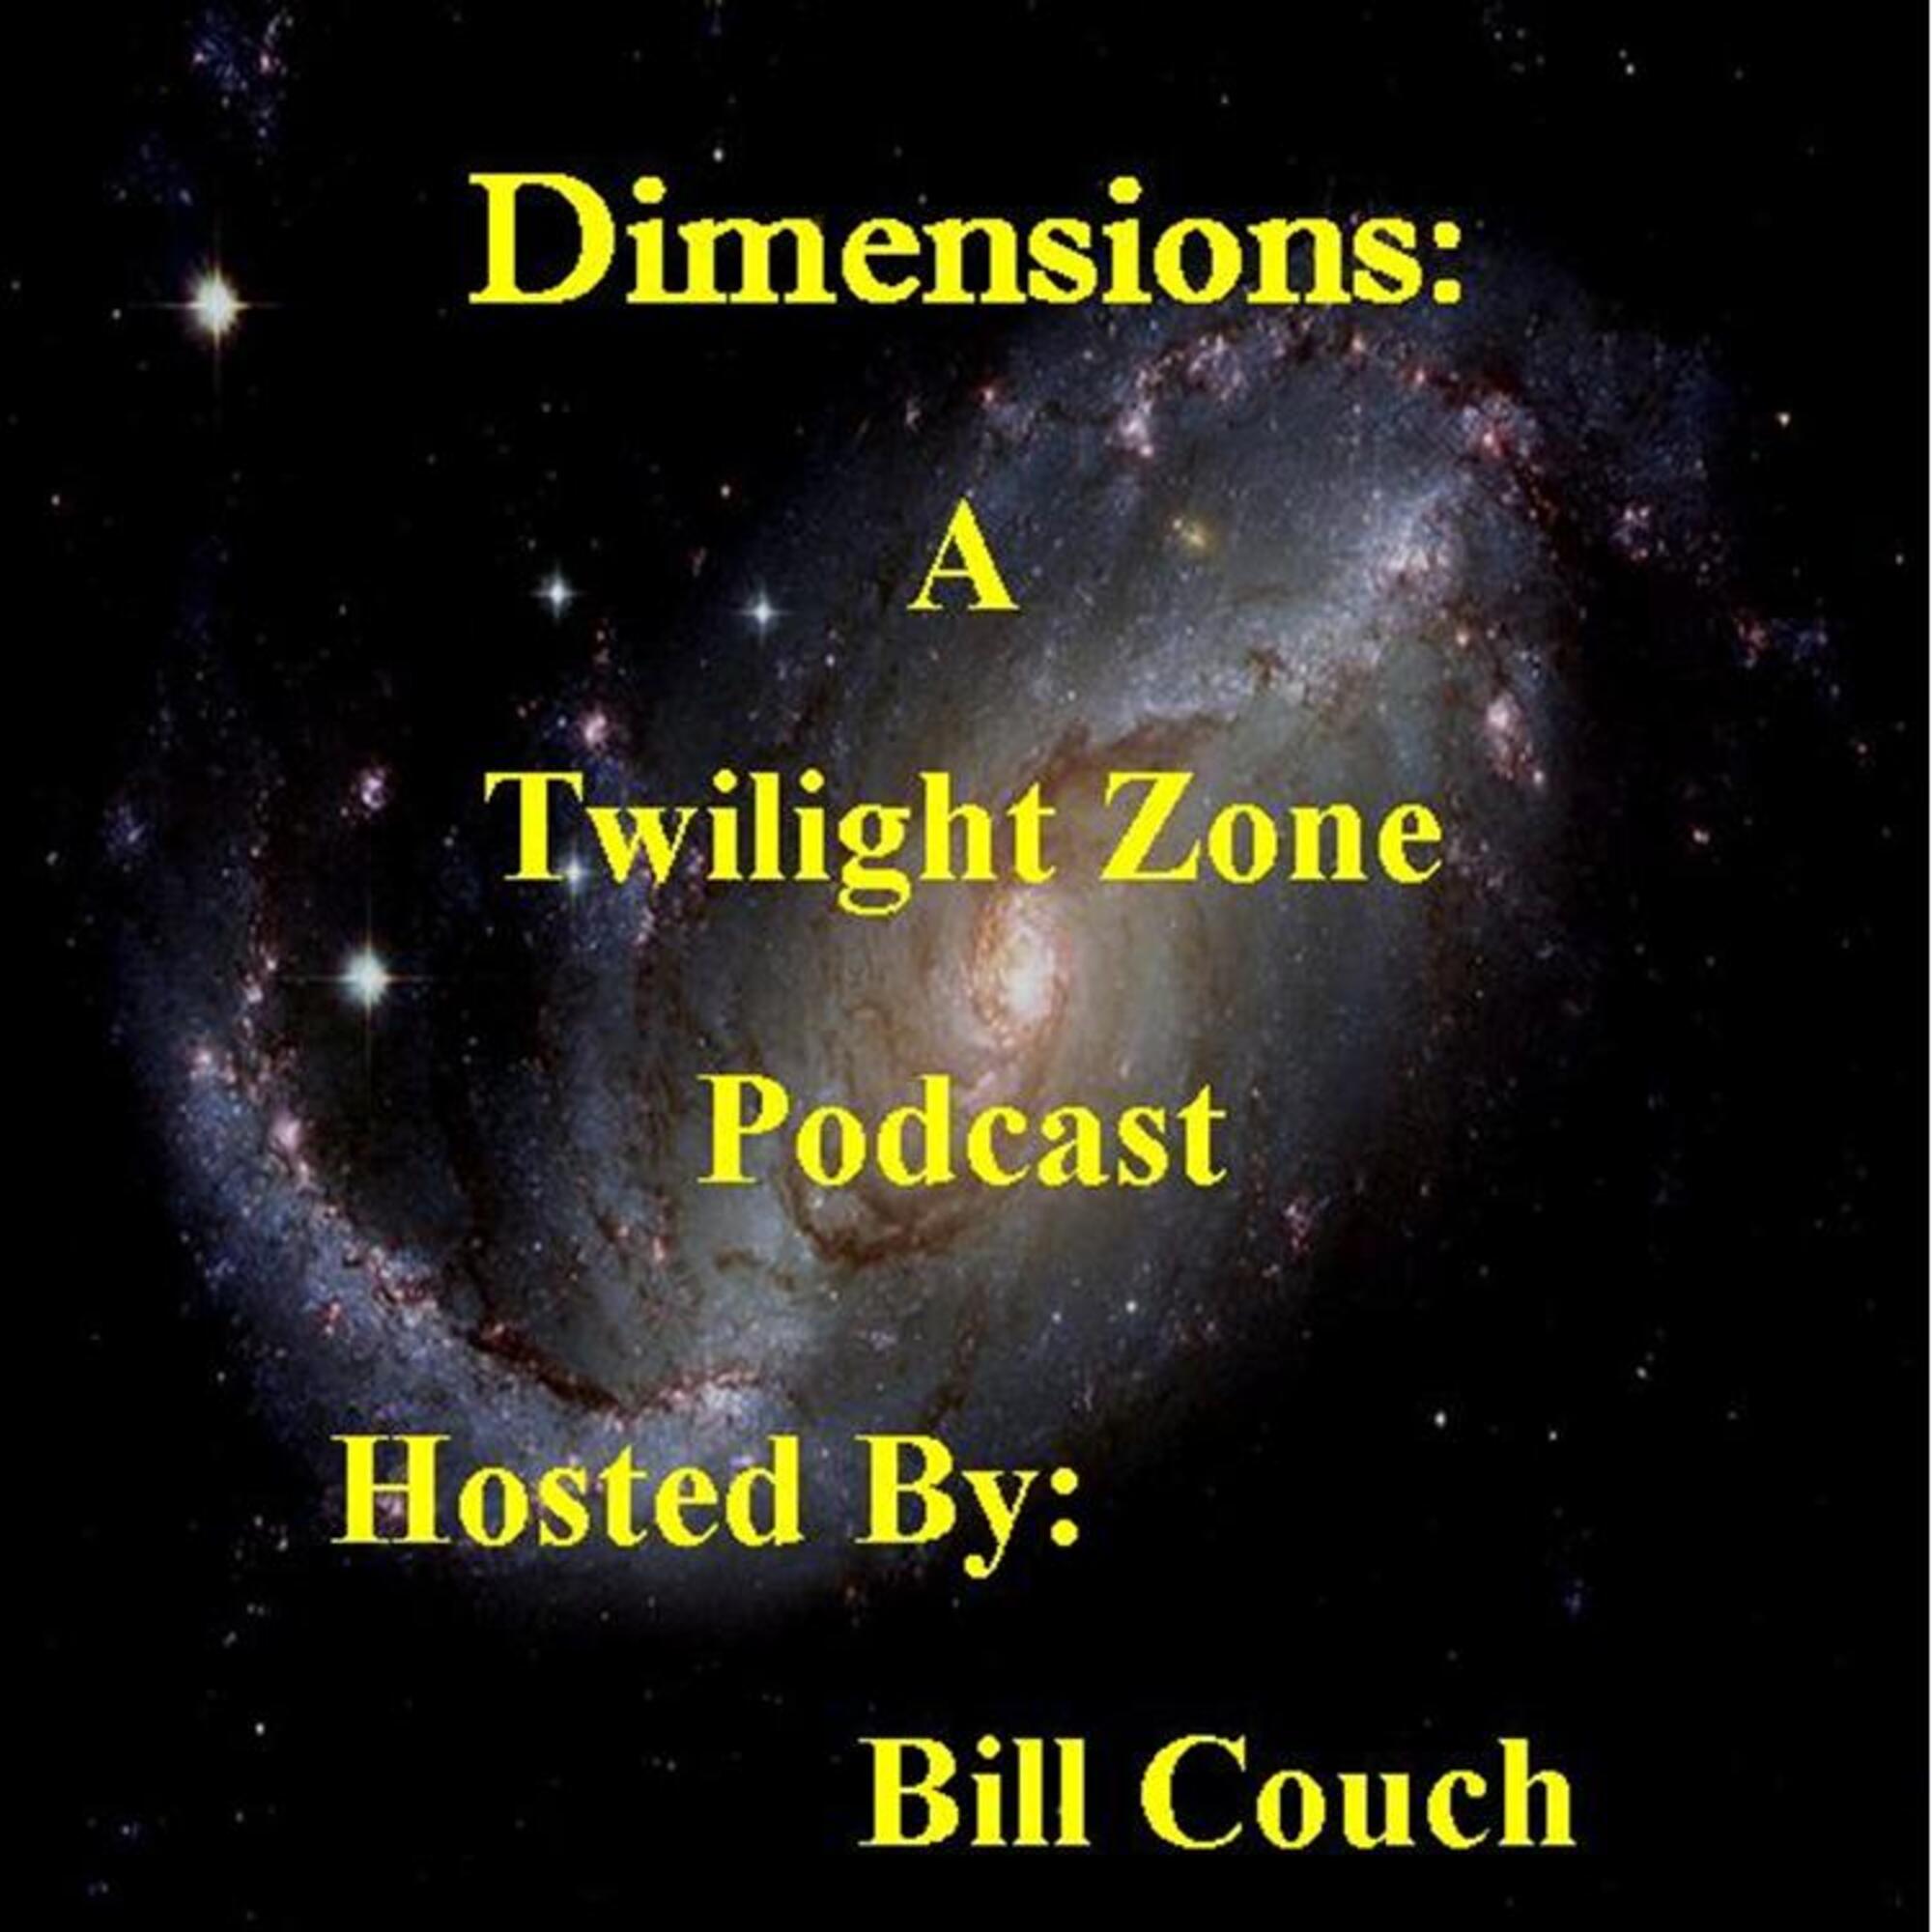 Dimensions: A Twilight Zone Podcast Season 2 Episode 5 ”The Howling Man”